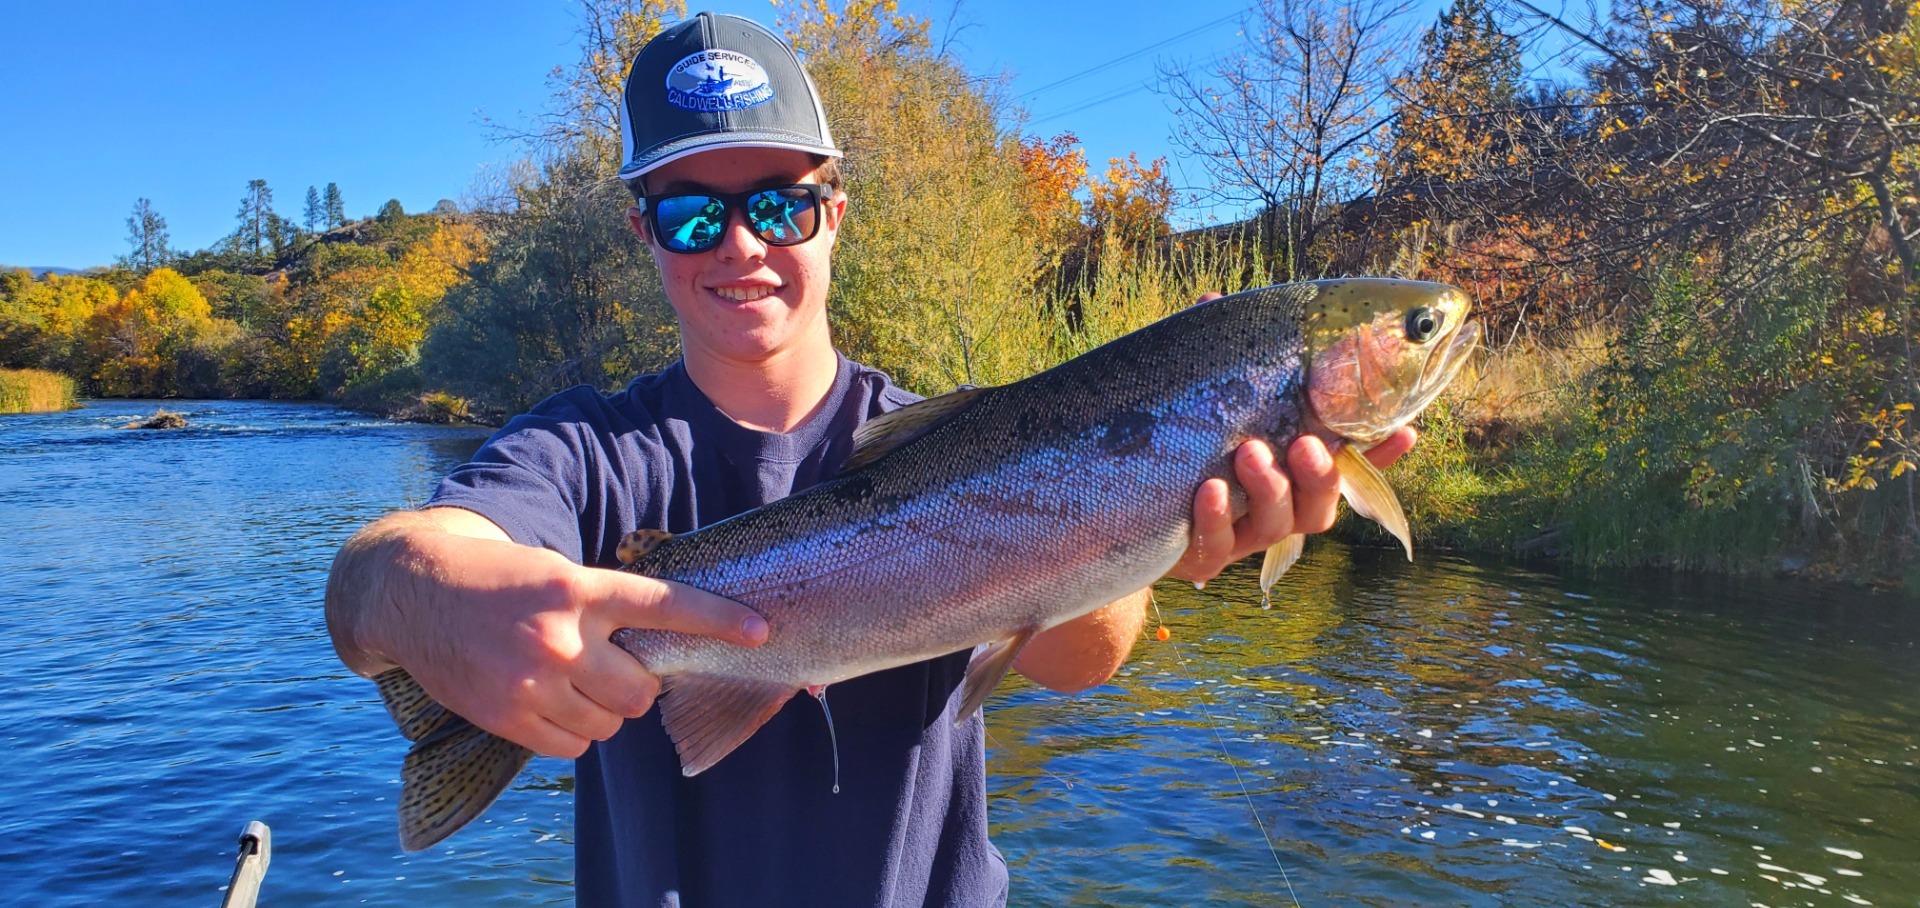 Klamath Steely Trout Smiles say it all